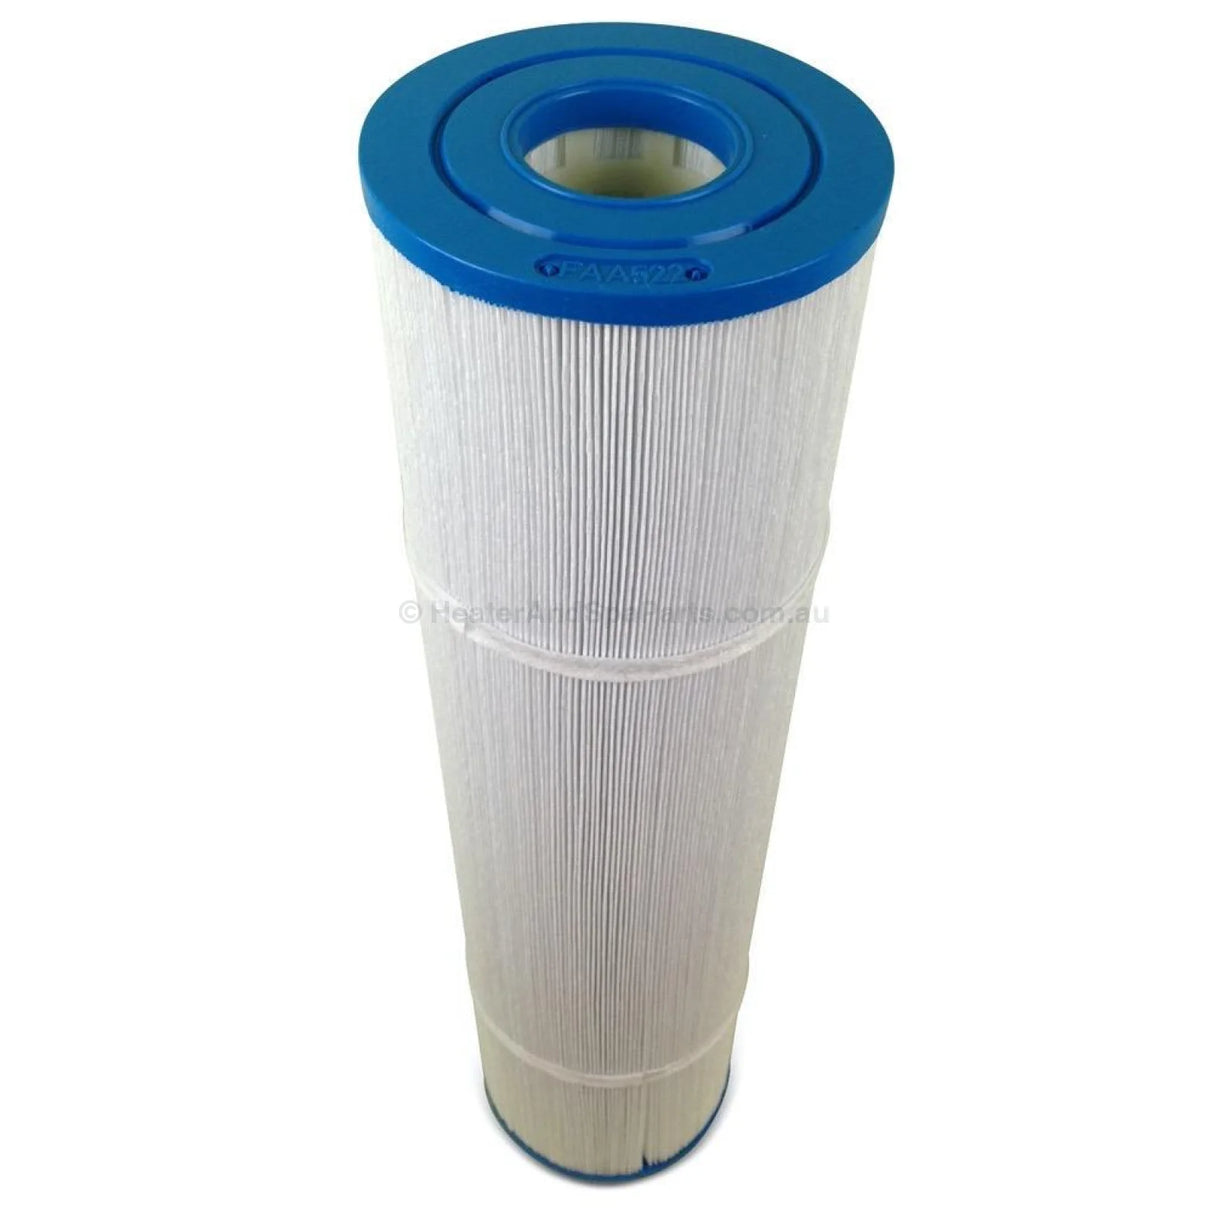 540mm x 135mm Coast Spas C100 - Replacement Cartridge Filter - Heater and Spa Parts